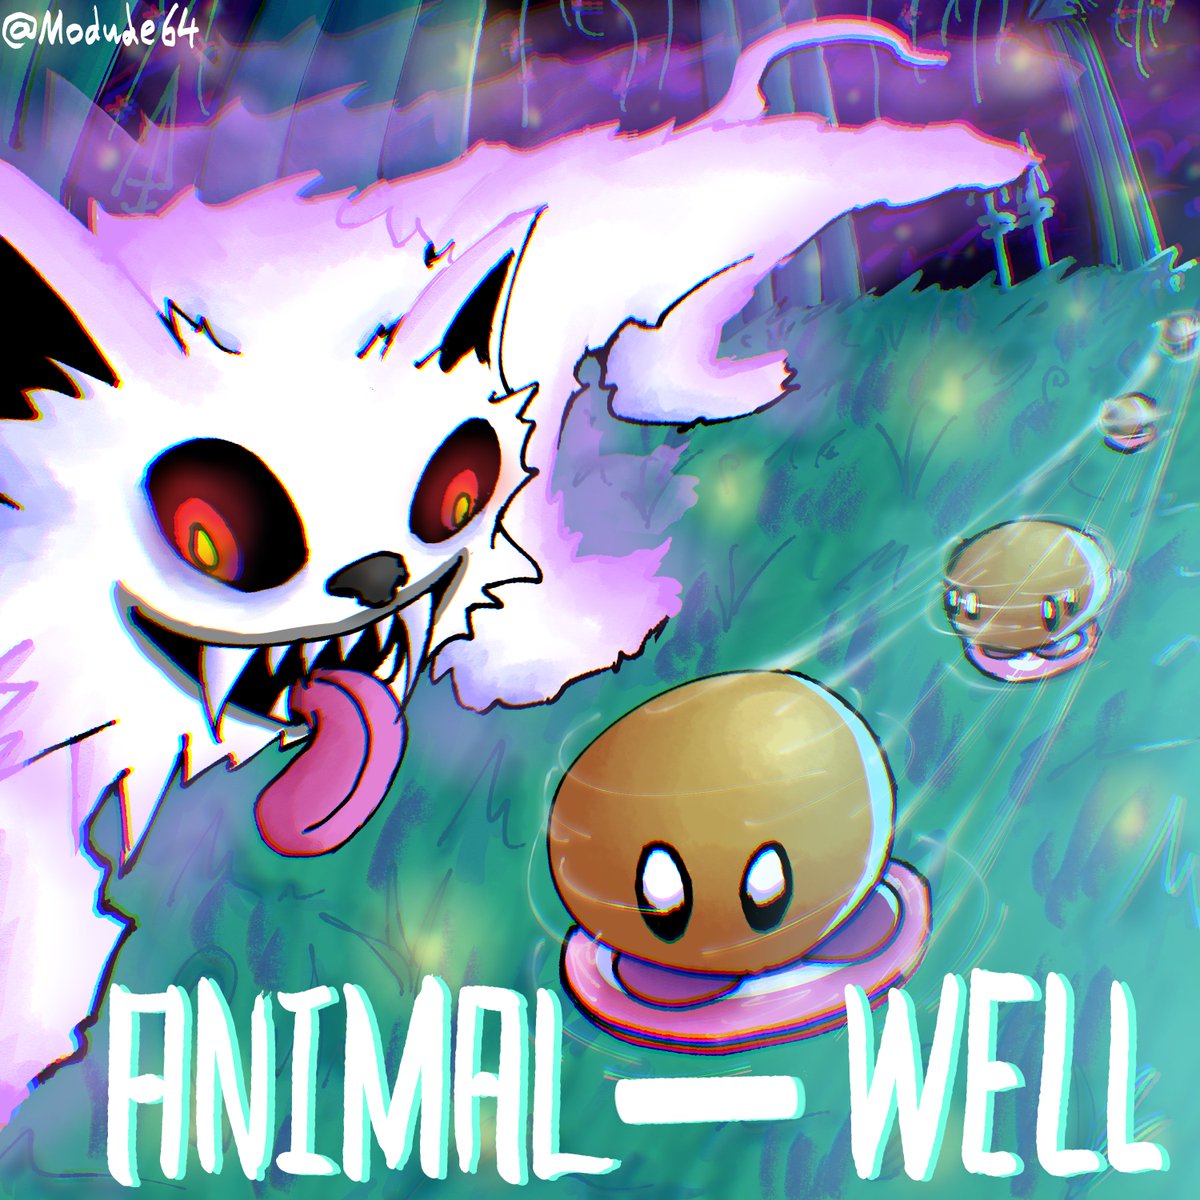 animal well was great, loved that you can ride the frisbee
#animalwell #digitalart #art